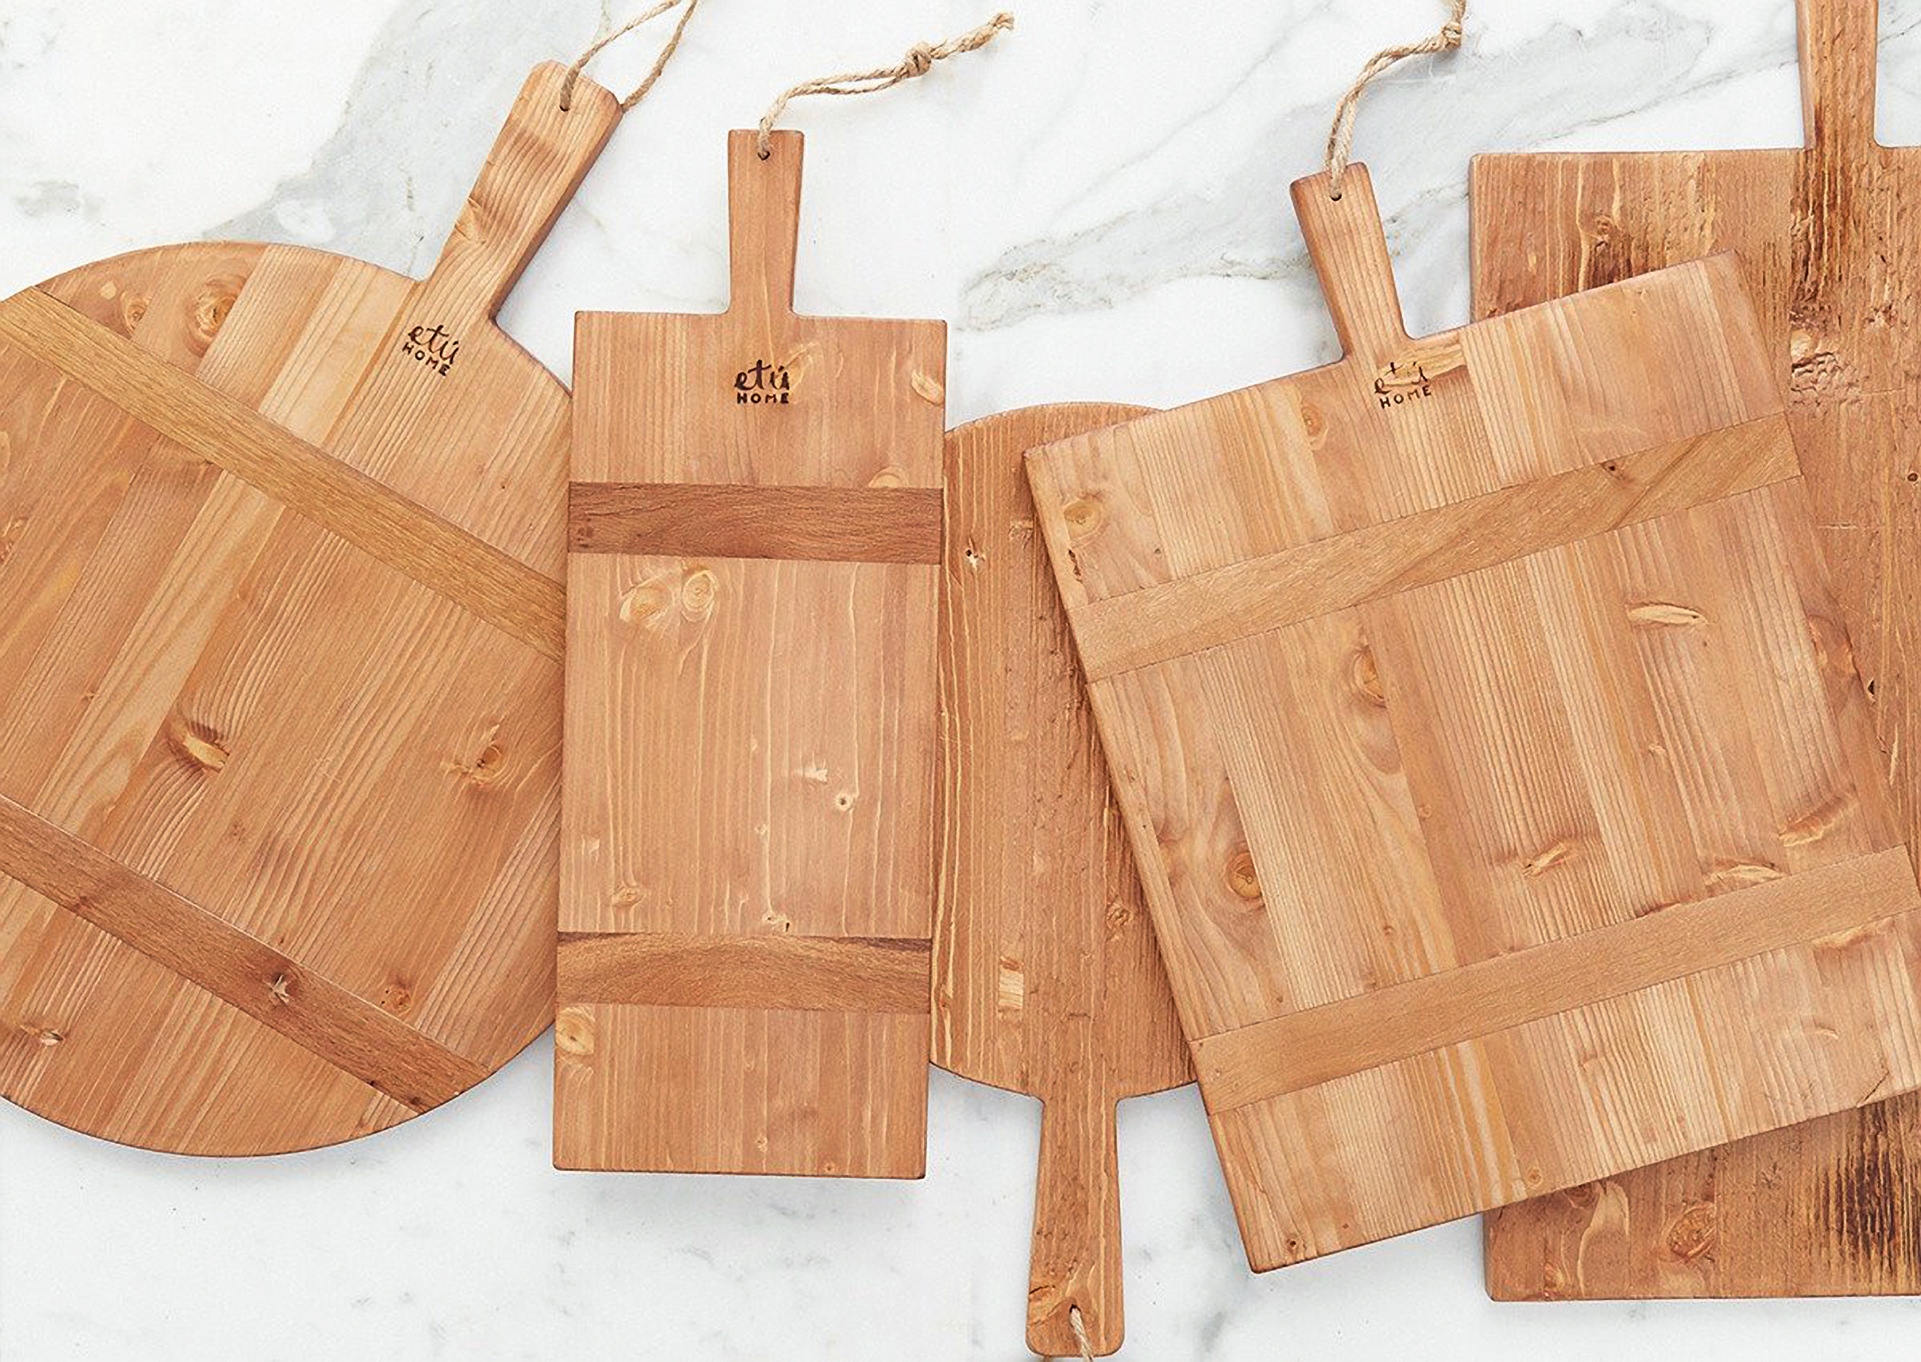 Stock your holiday gift closet and stop stressing - Serving Boards